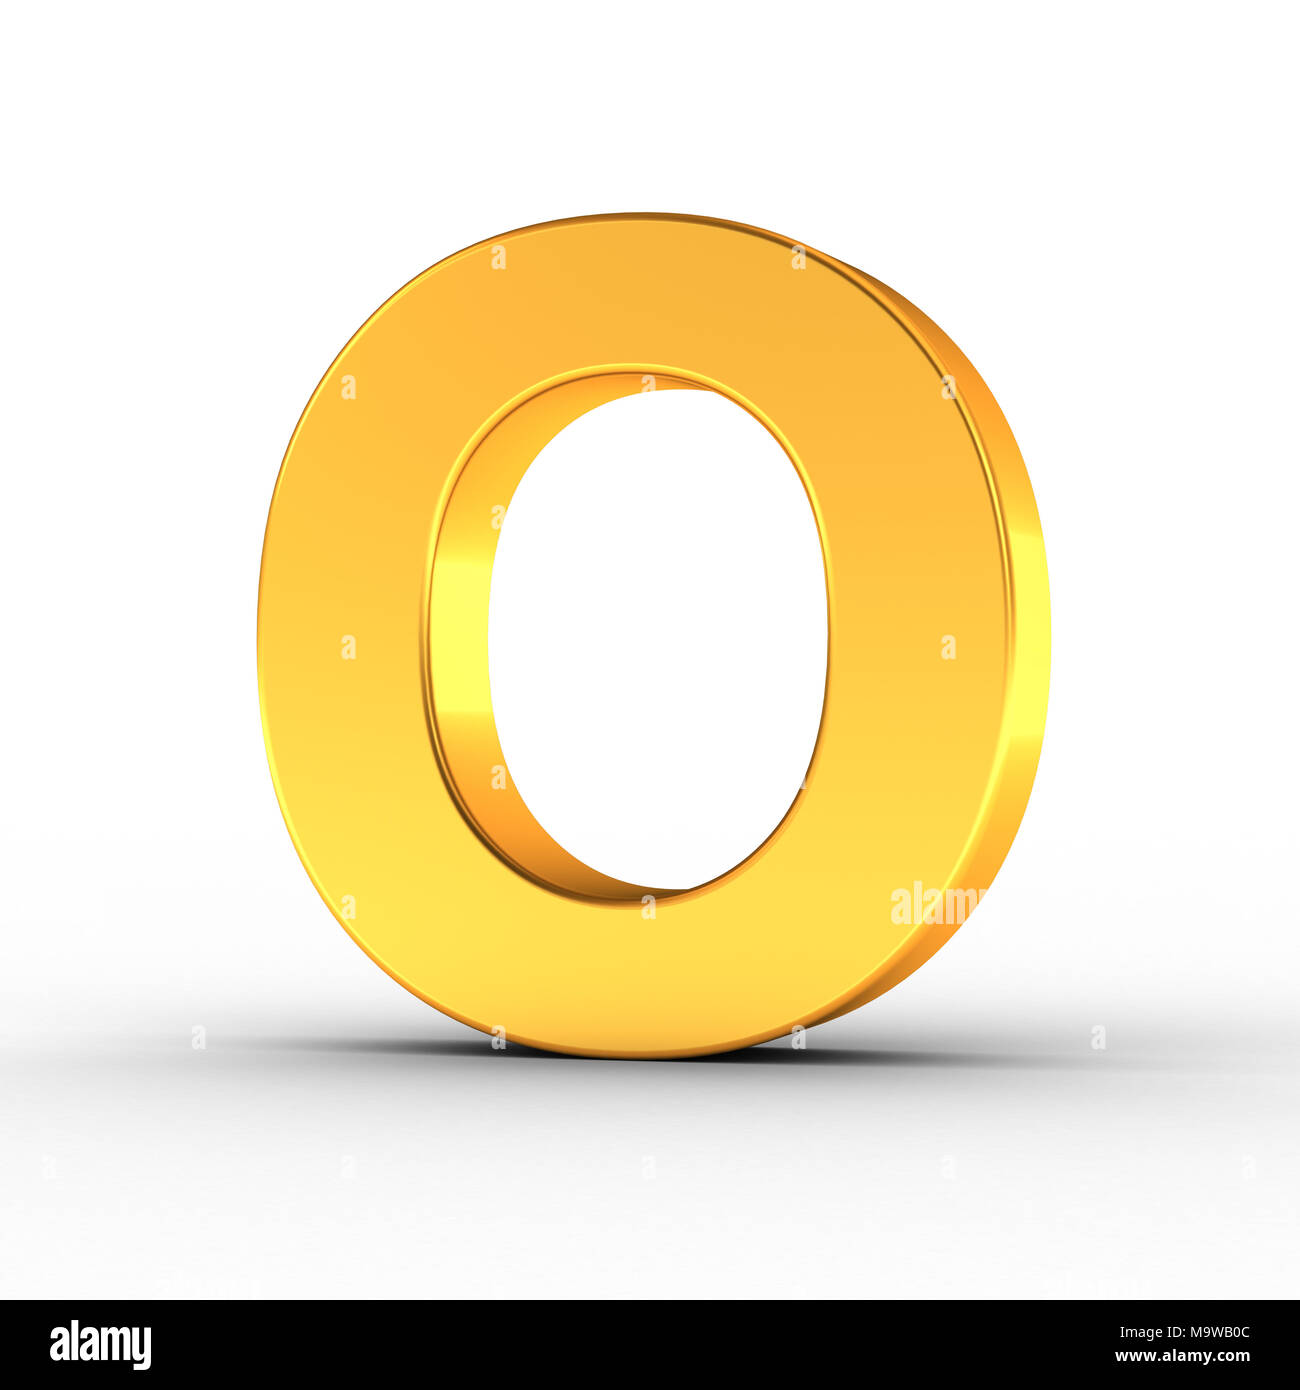 The Letter O as a polished golden object over white background with clipping path for quick and accurate isolation. Stock Photo